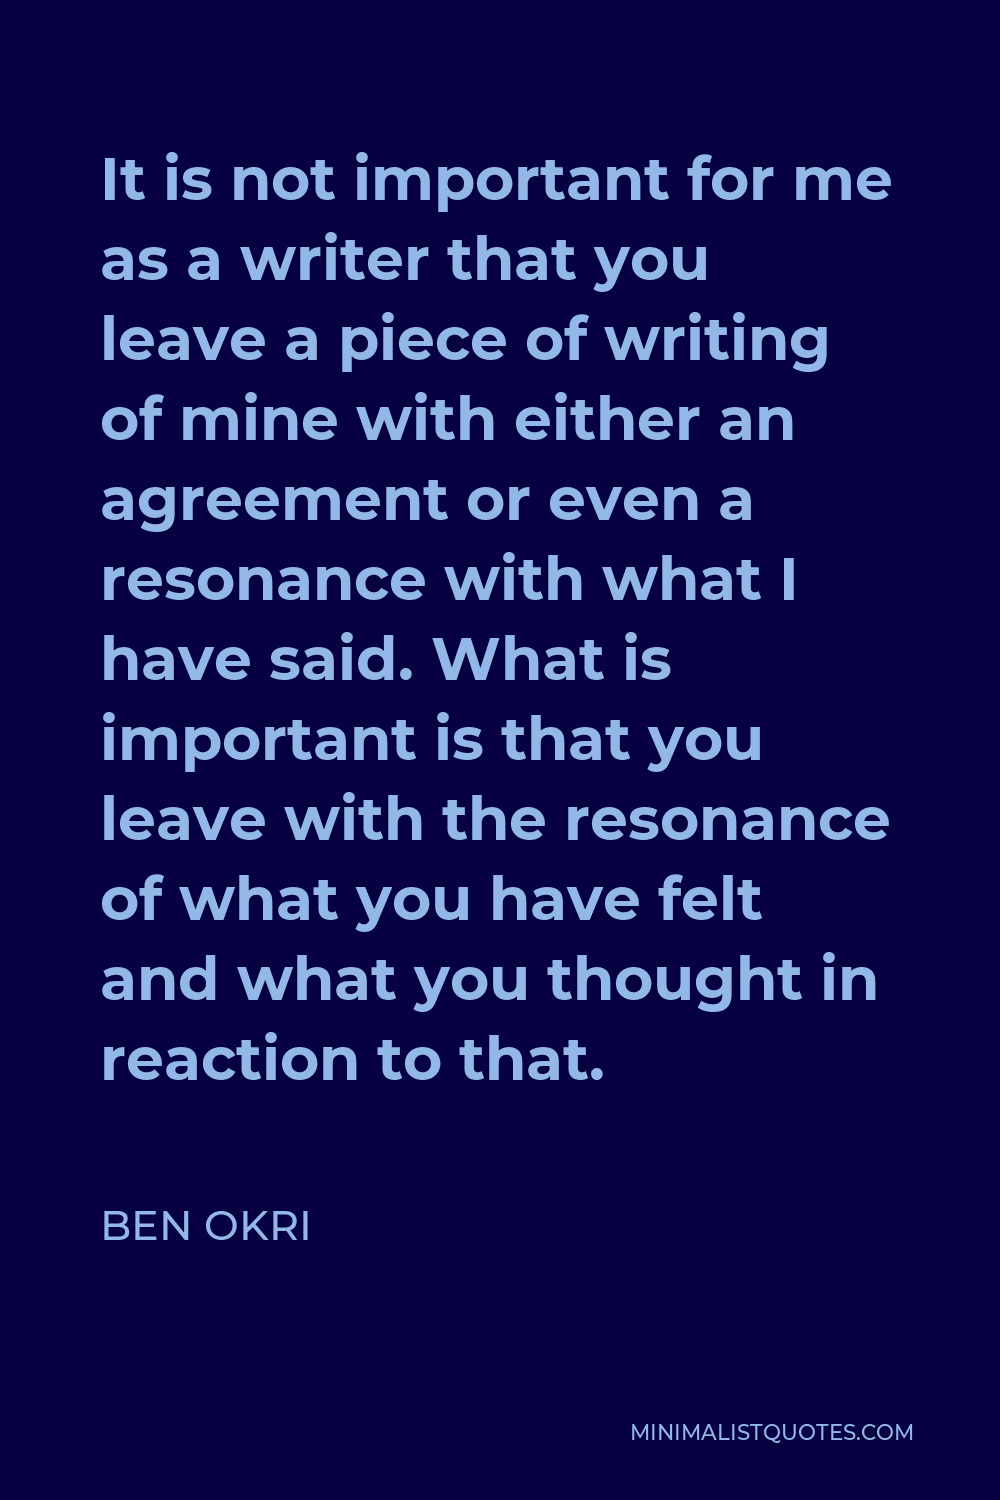 Ben Okri Quote - It is not important for me as a writer that you leave a piece of writing of mine with either an agreement or even a resonance with what I have said. What is important is that you leave with the resonance of what you have felt and what you thought in reaction to that.